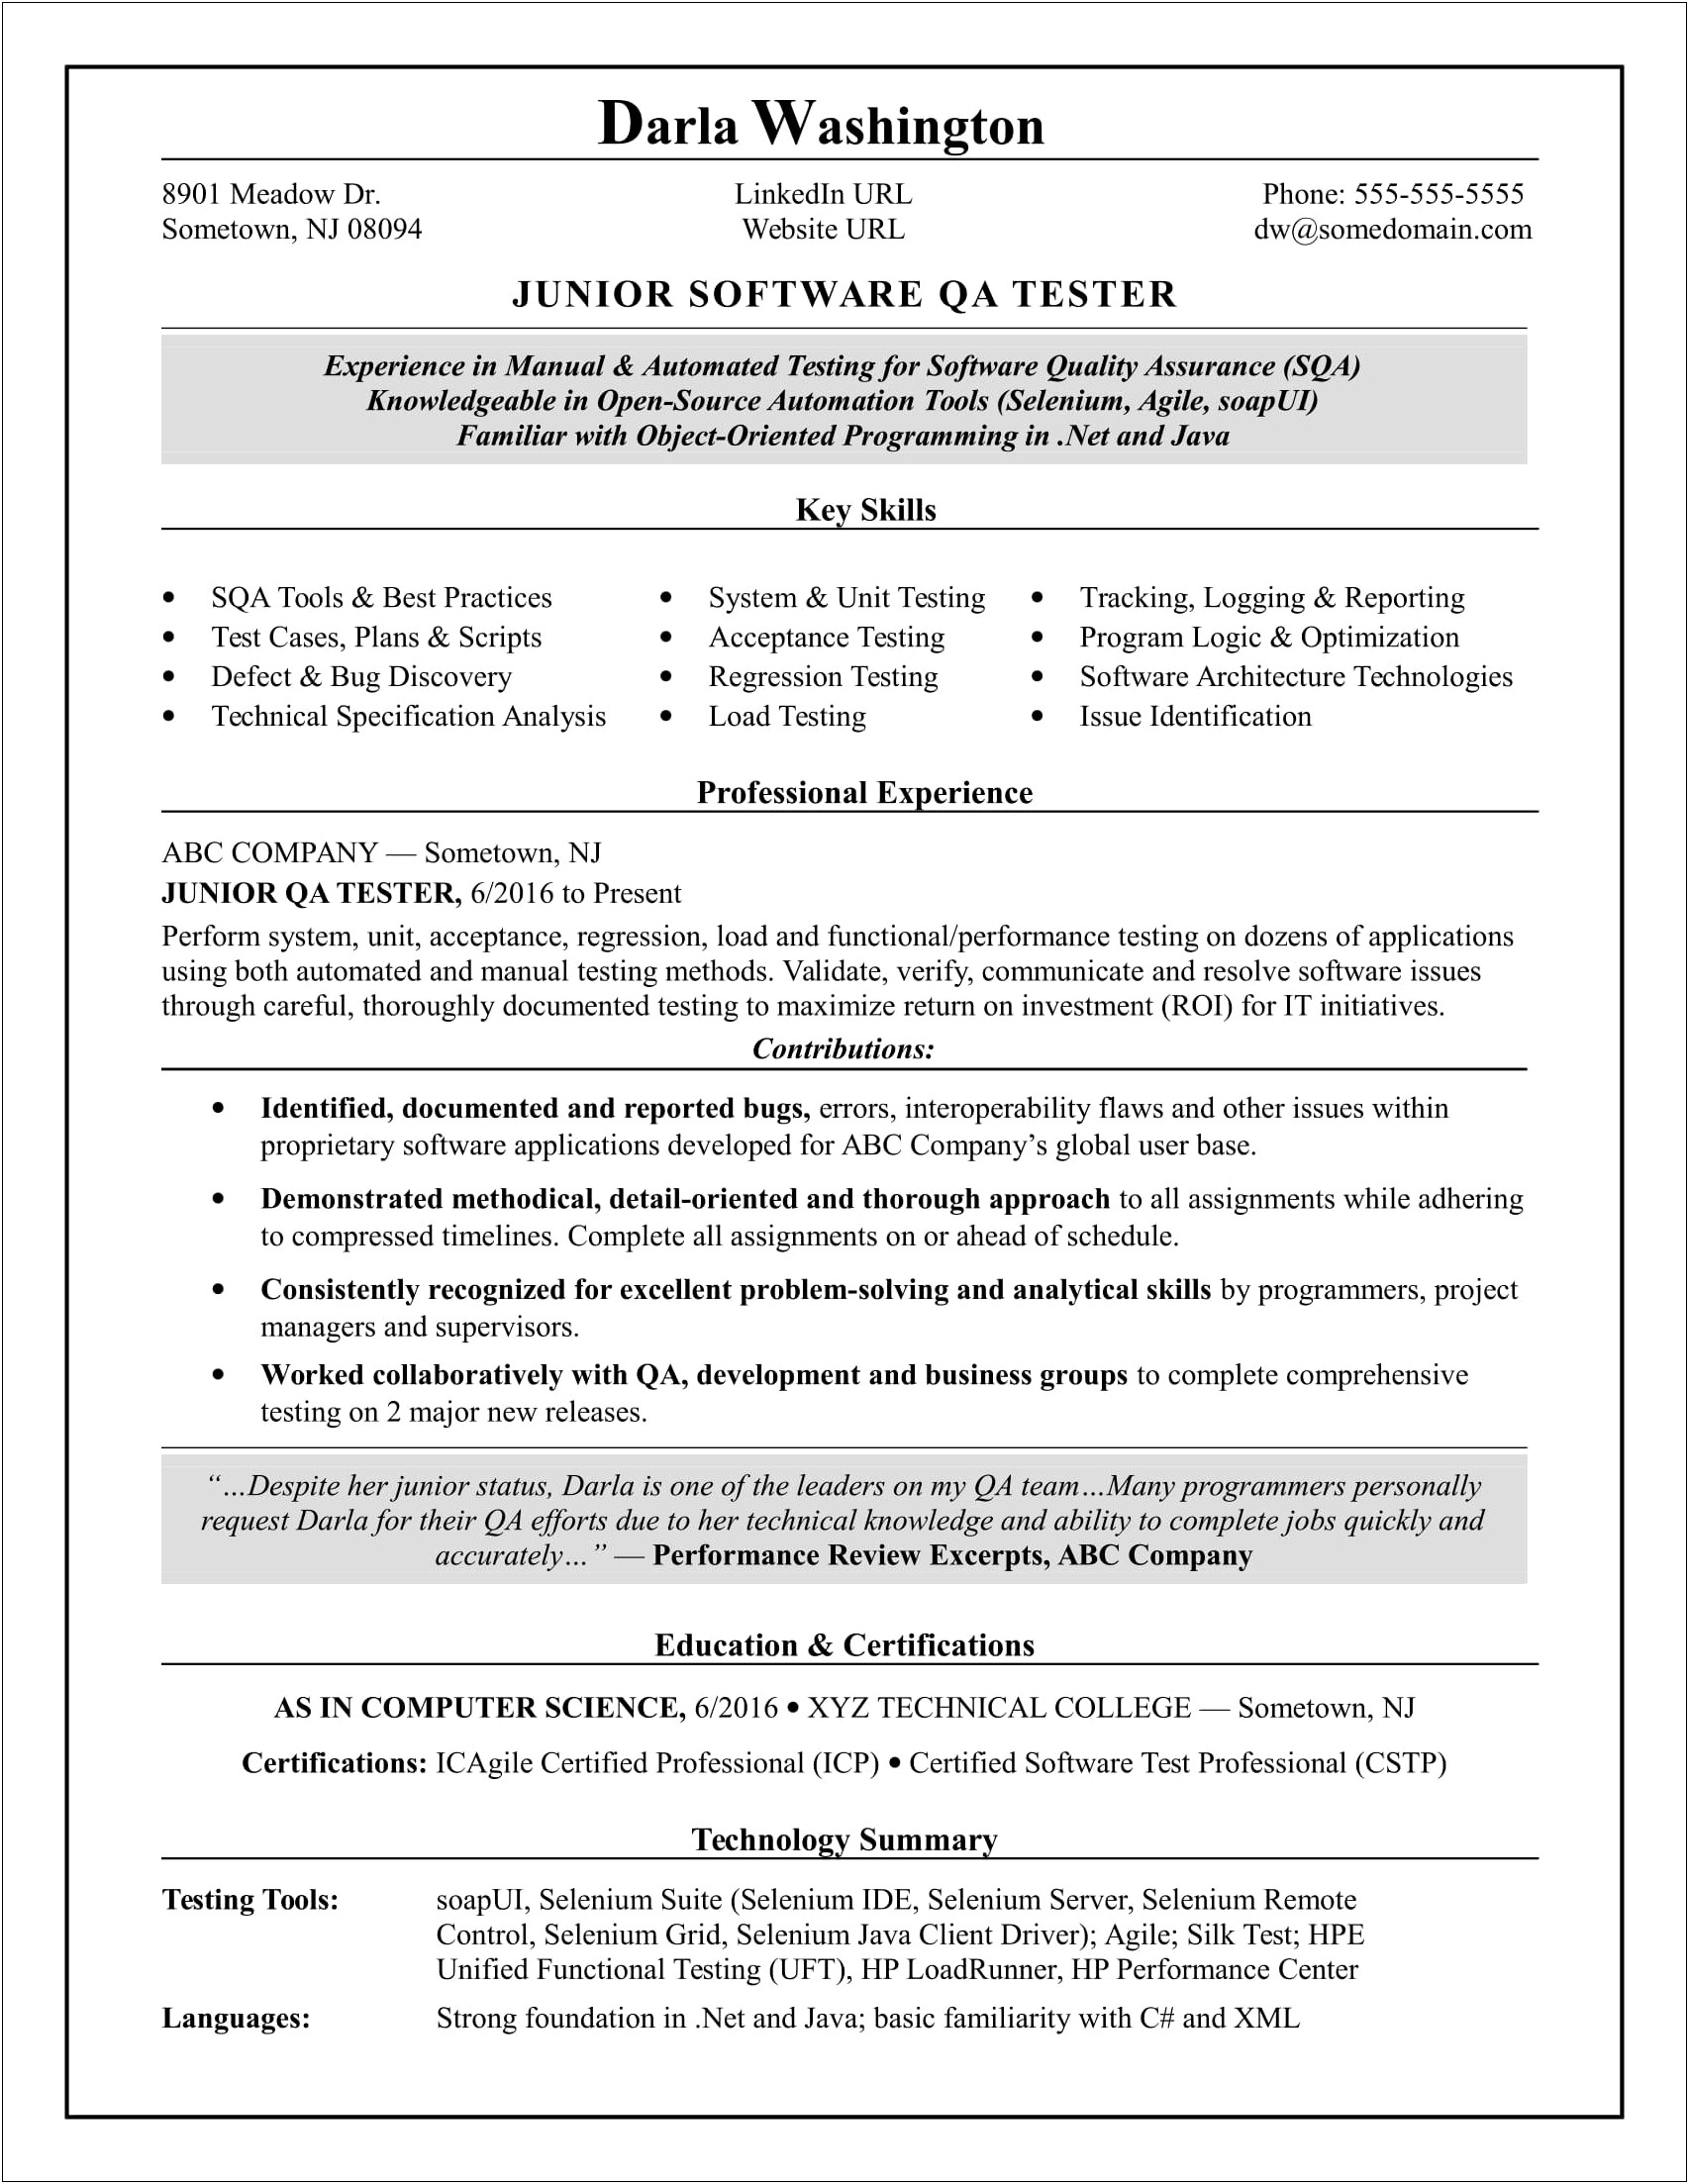 Sample Resume With Manual Testing Experience